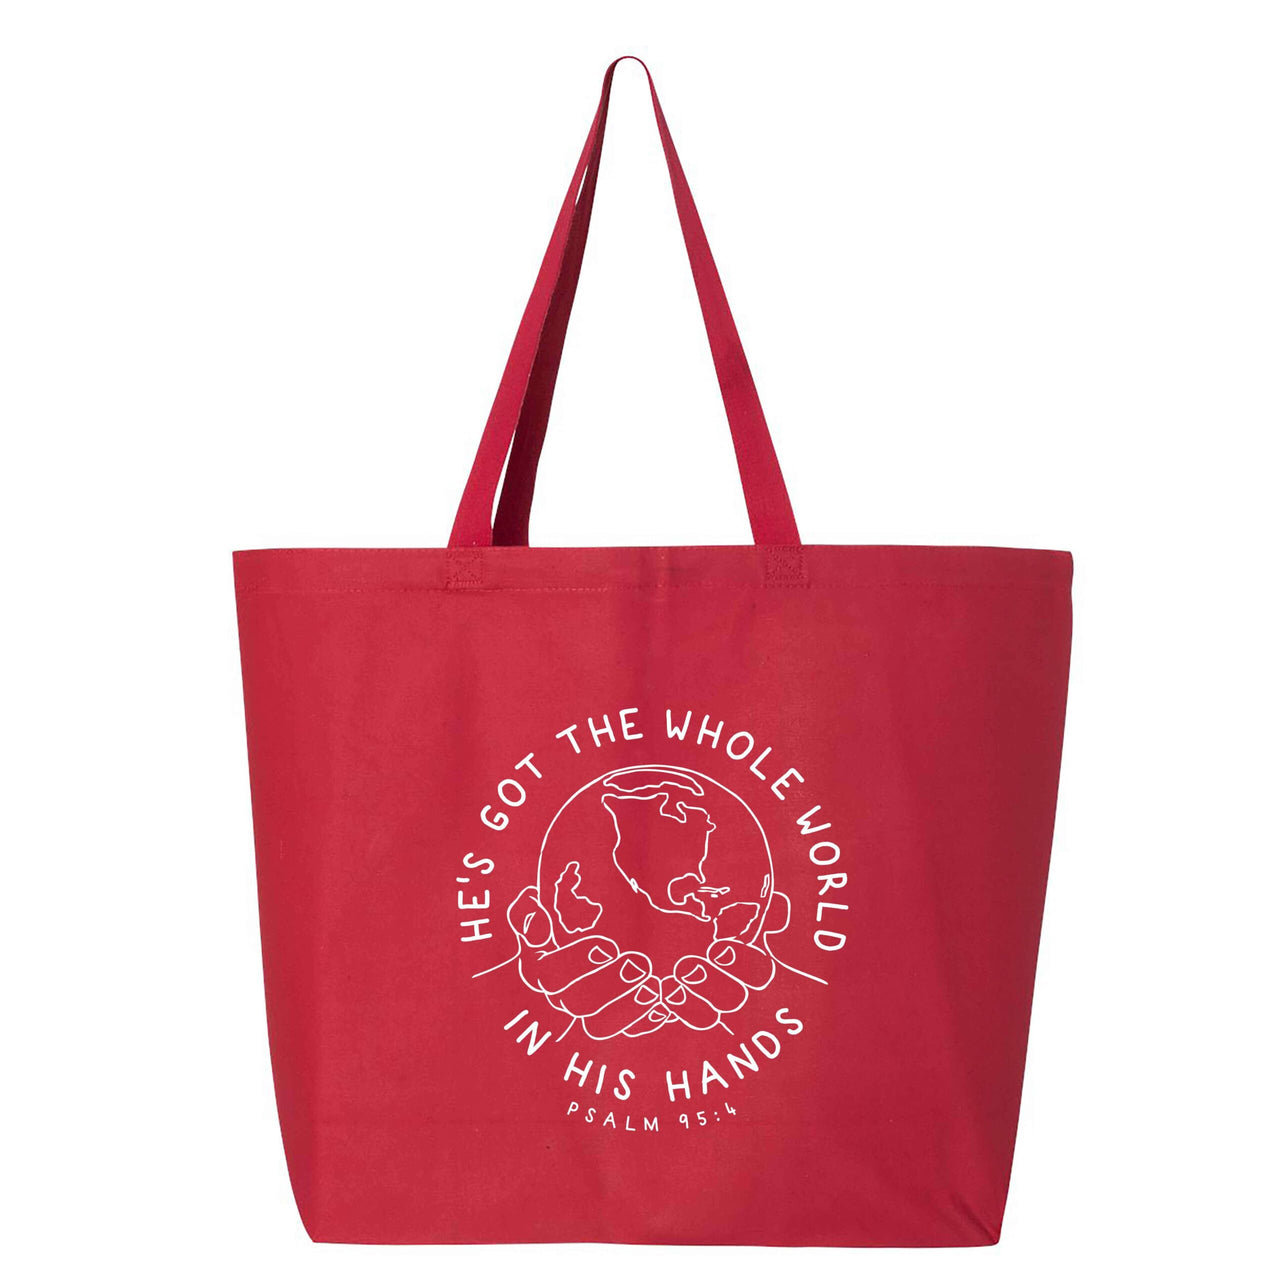 He's Got The Whole World In His Hands Jumbo Tote Canvas Bag